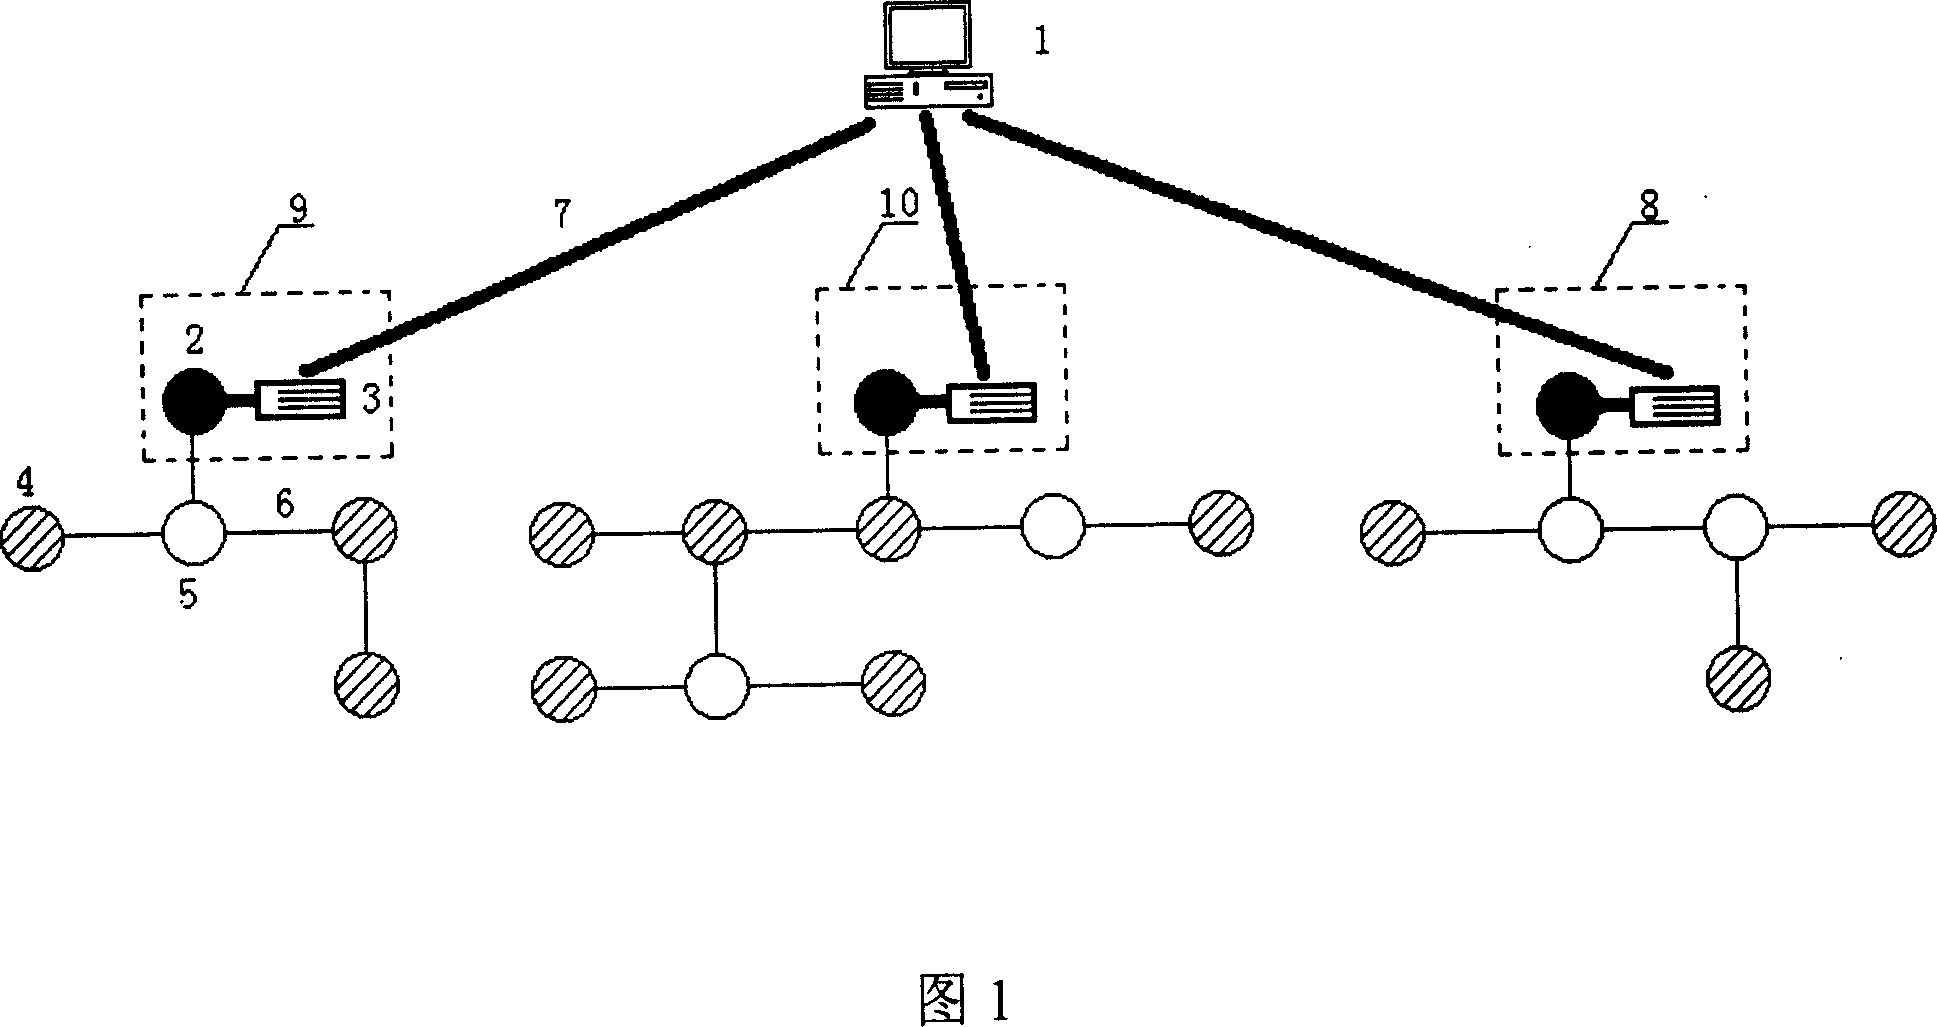 Wireless sensor web based real-time collection system of road circumstance state information